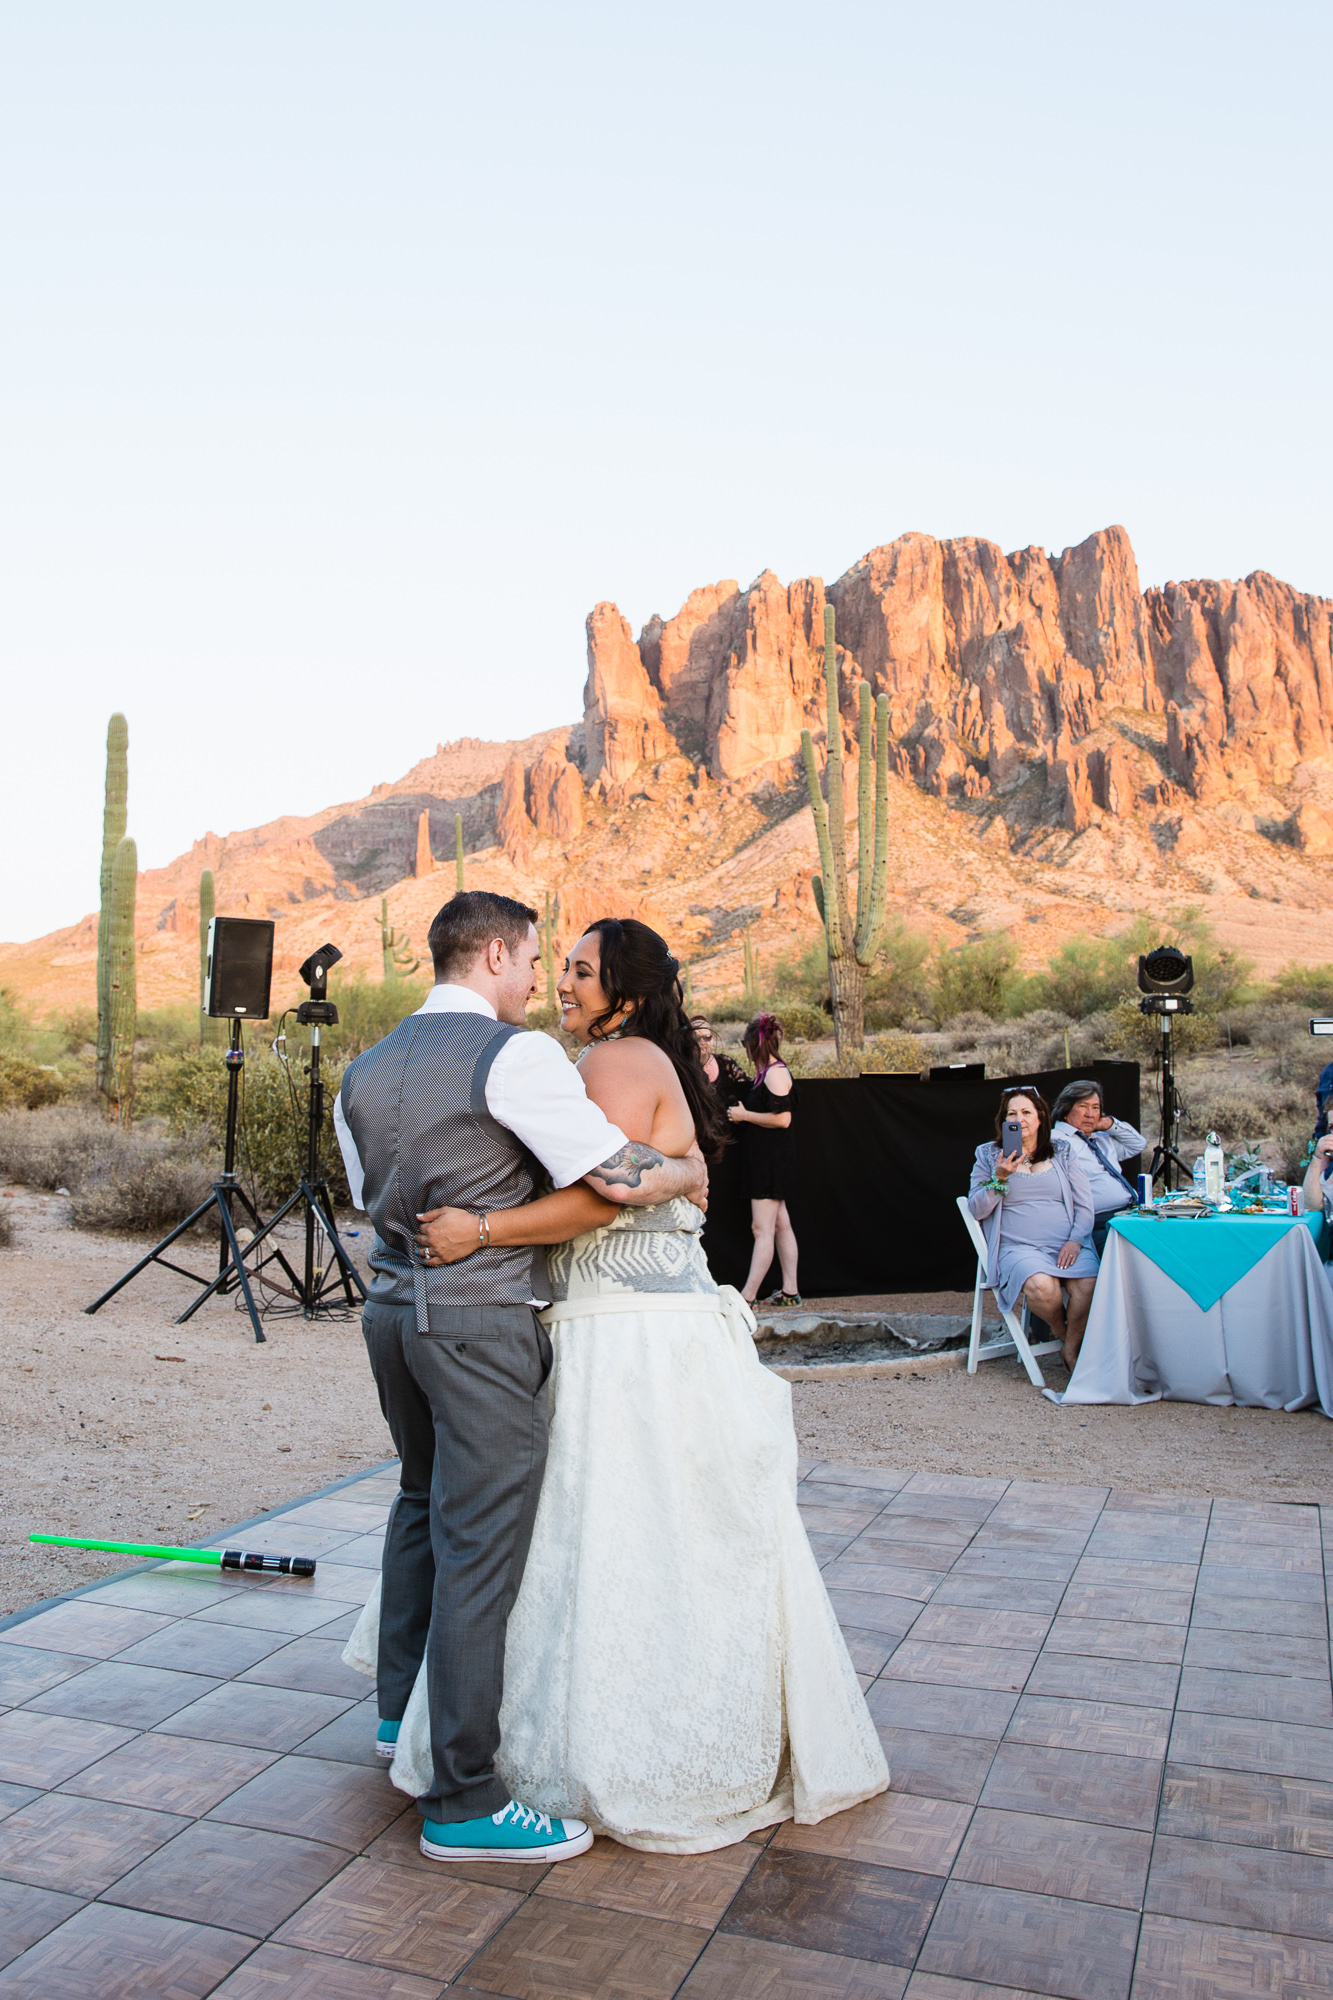 Bride and grooms first dance at their Lost Dutchman State Park wedding reception by Arizona wedding photographer PMA Photography.